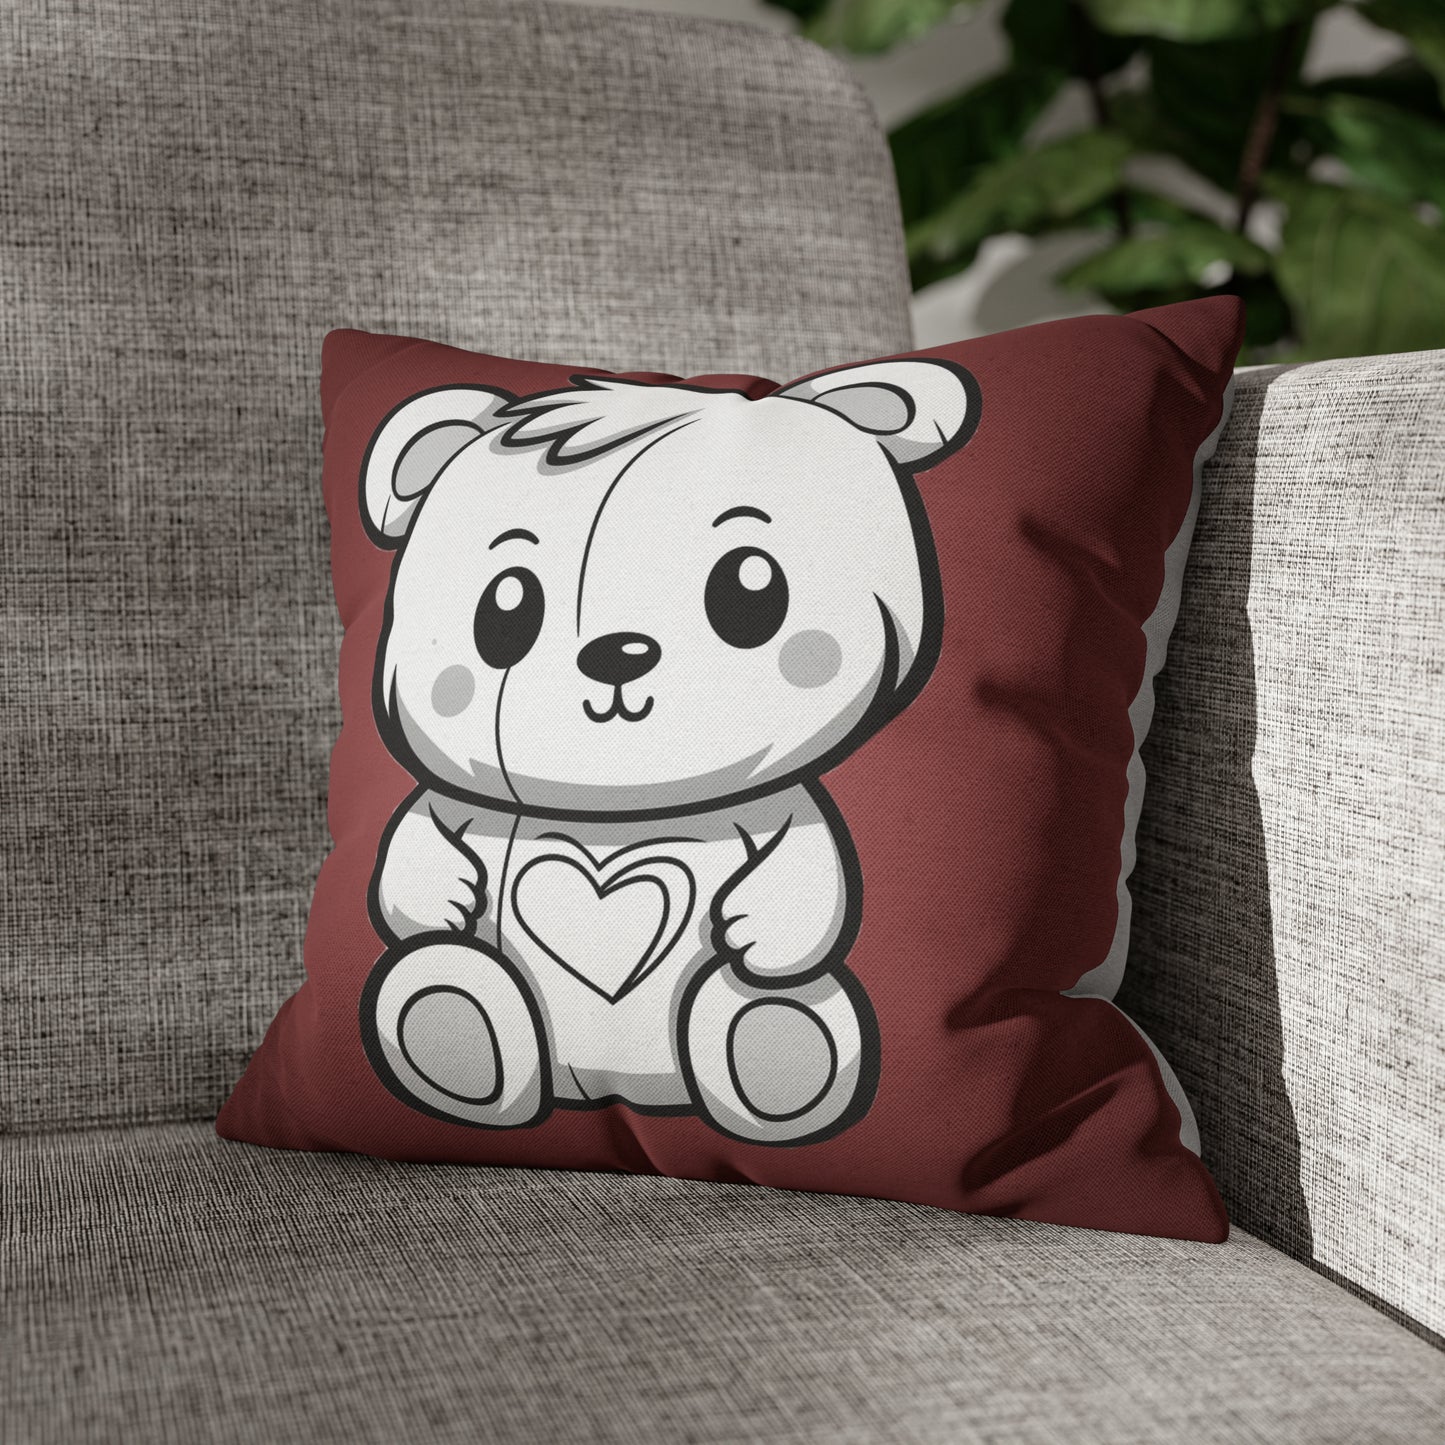 Painted Pillows - Color Me Teddy